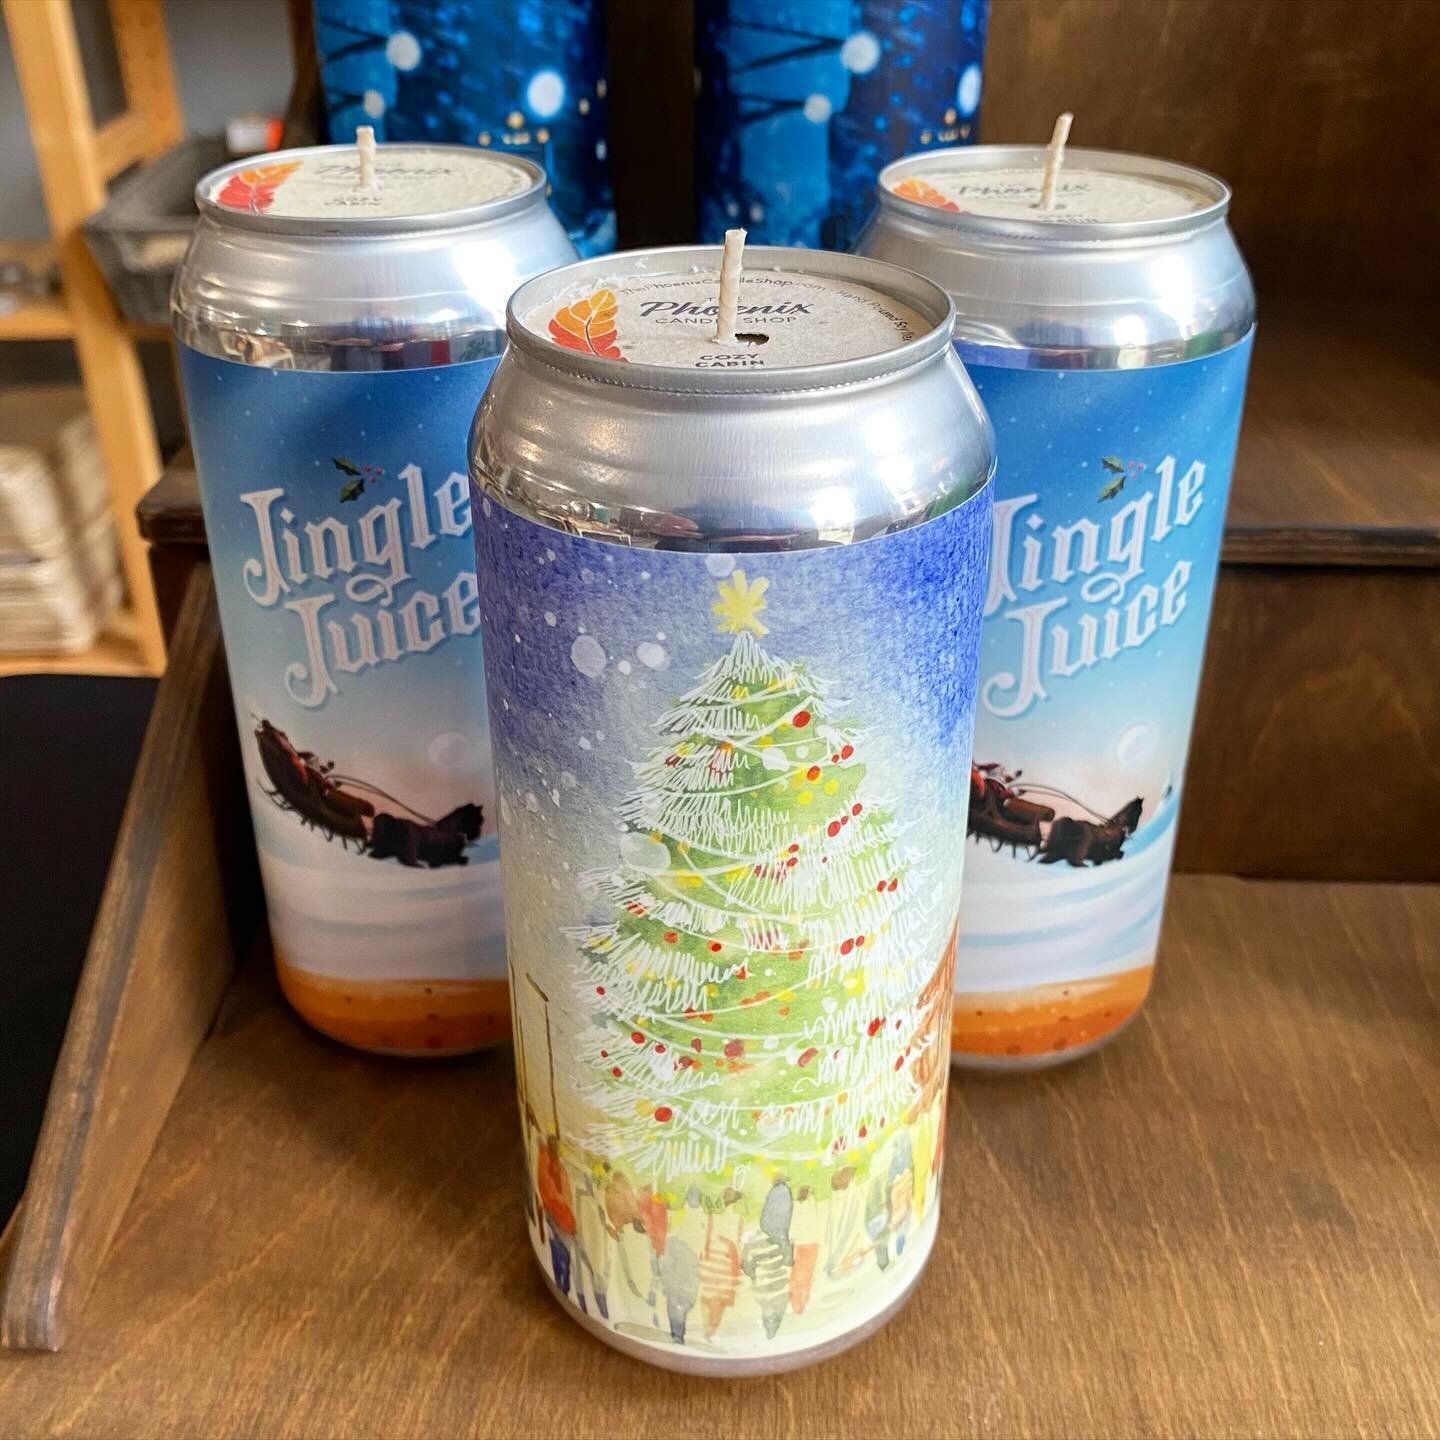 Unique gift idea? You got it! Our candles are made in recycled beer cans with 100% soy wax. And the best part? You can recycle it again when you plant the seed-paper dust cover in the can after your done with the candle! Win win!

These candles make 